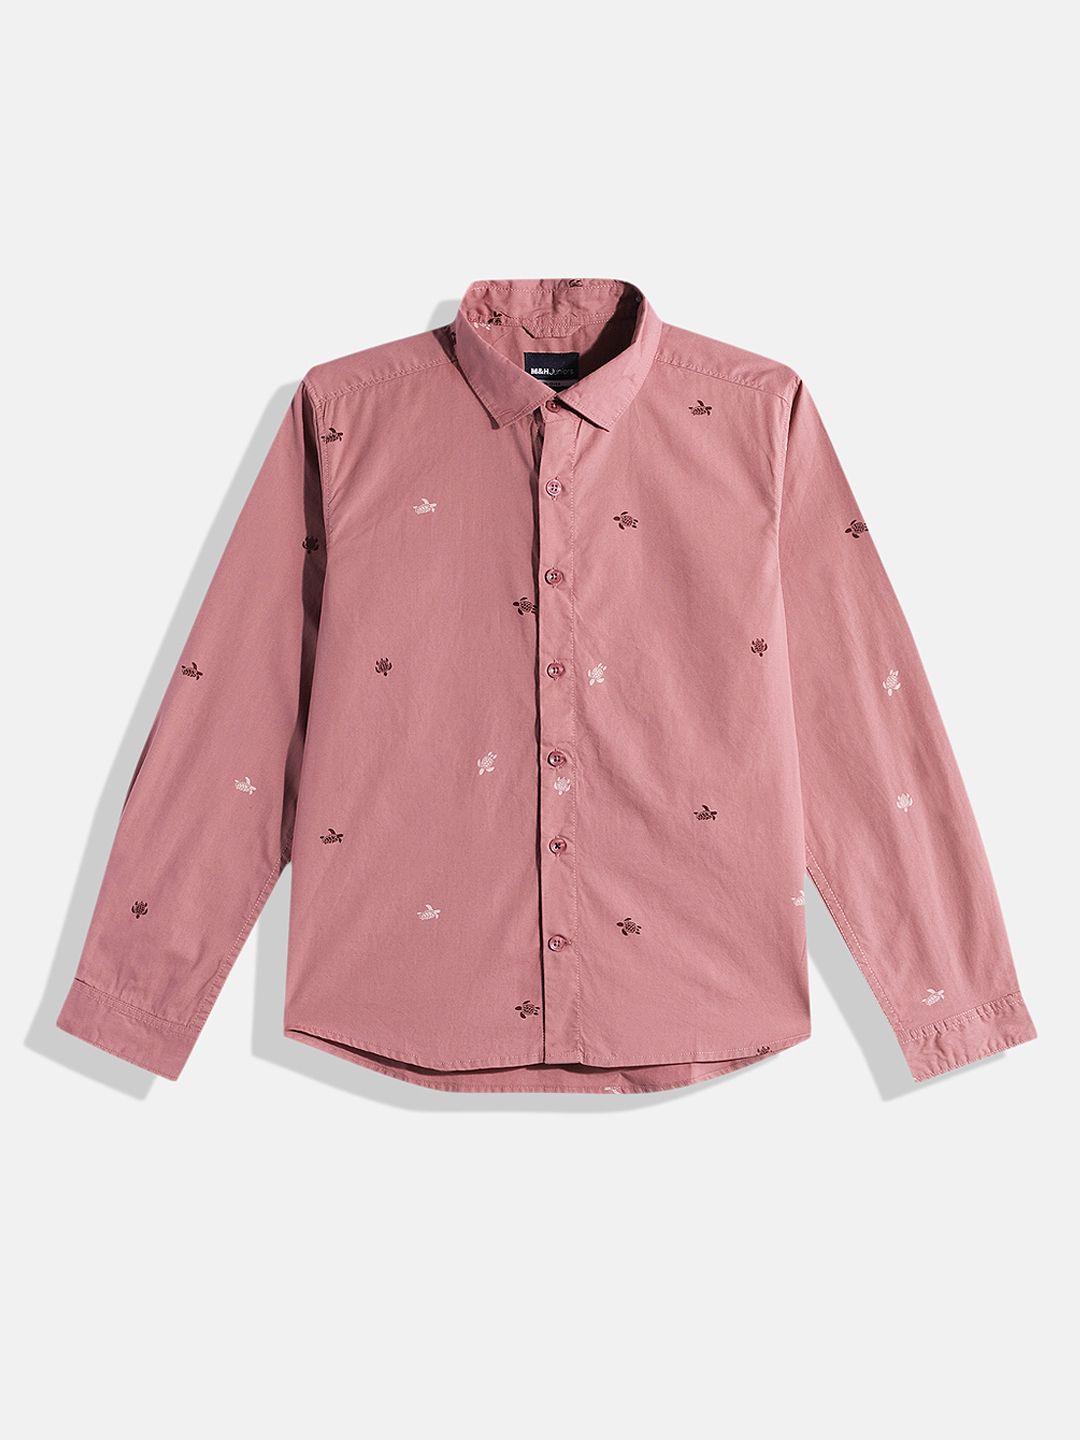 m&h juniors boys pink printed pure cotton casual shirt